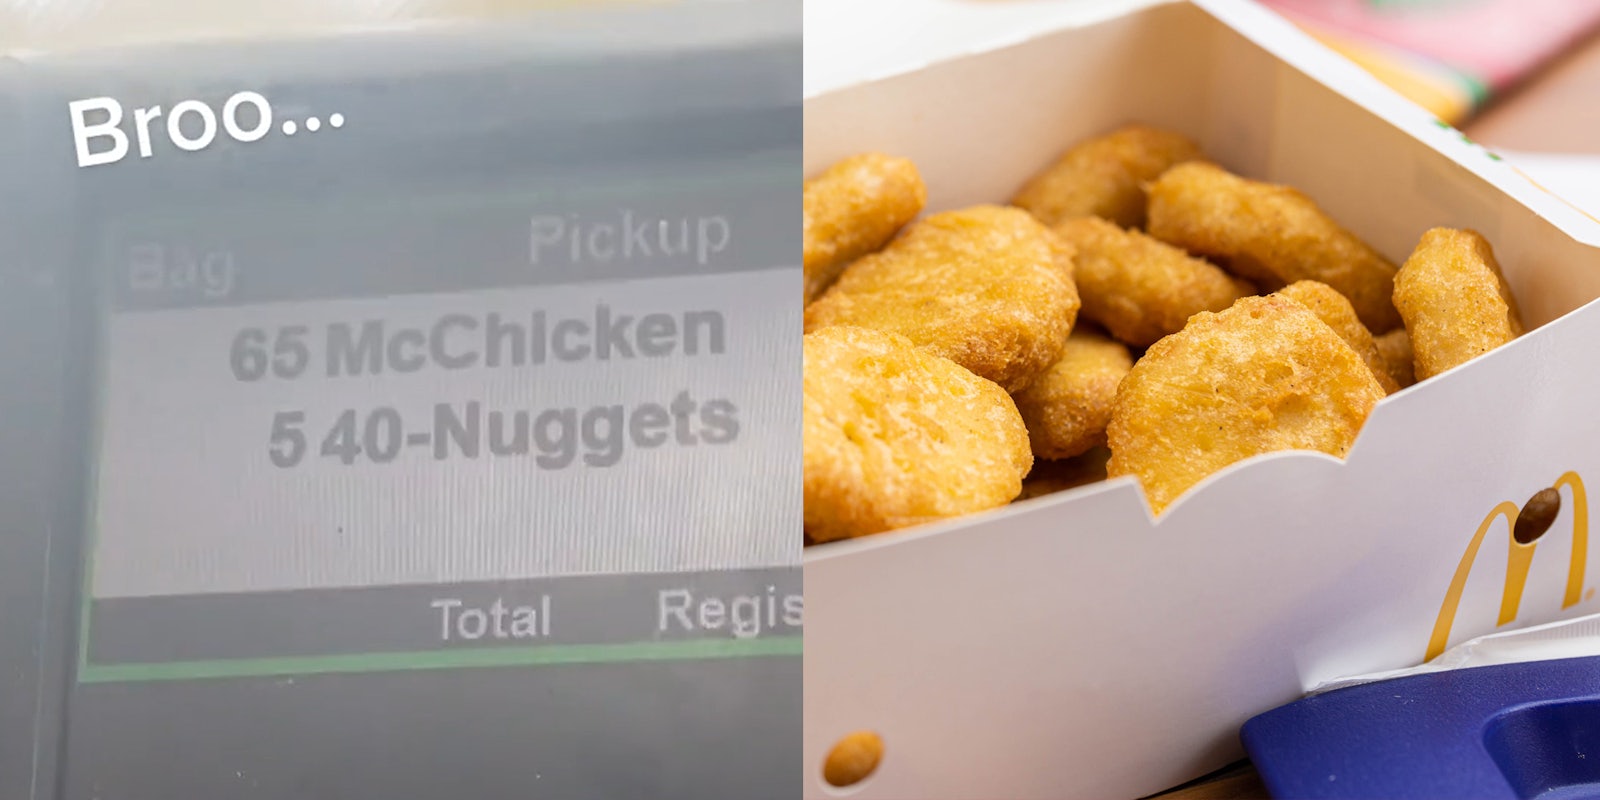 McDonalds order screen showing order for 65 McChicken and 5 40 Nuggets with caption 'Broo...' (l) McDonald's McNuggets in box (r)